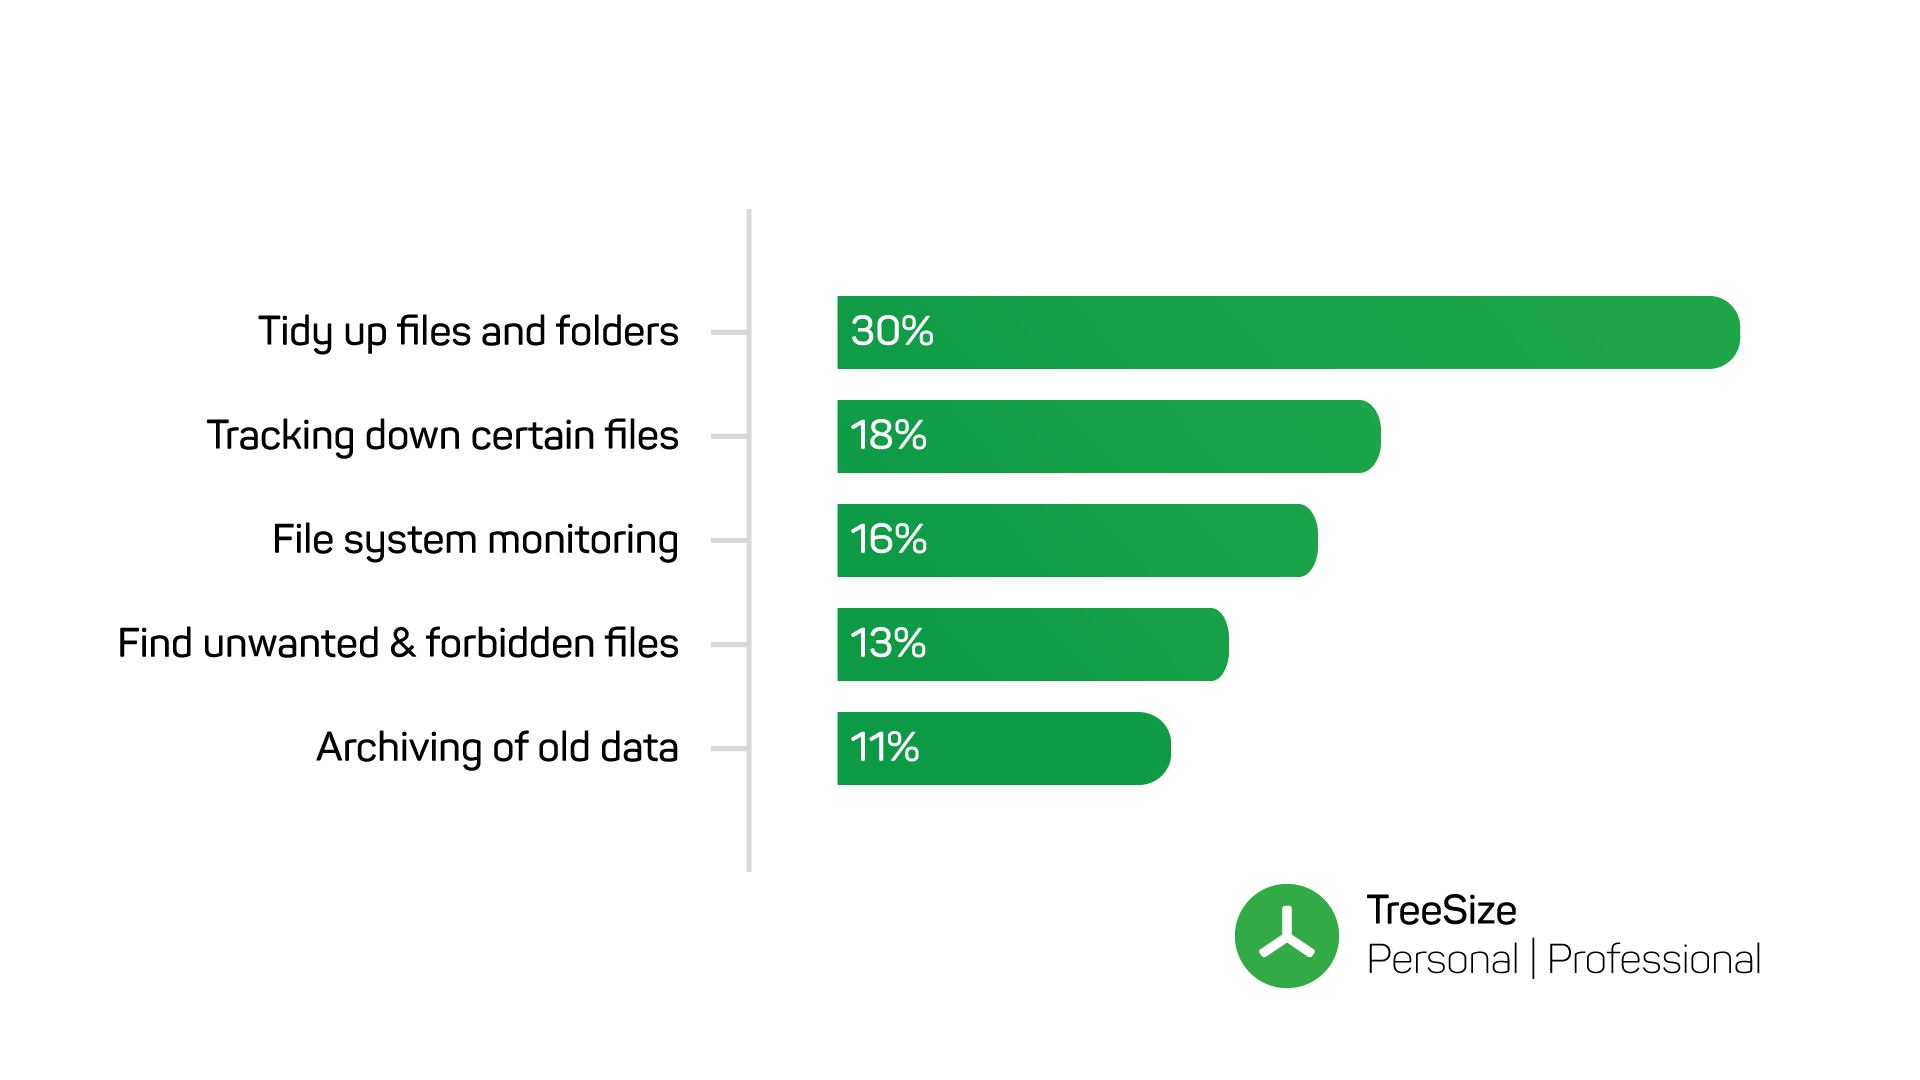 TreeSize Professional most popular use cases